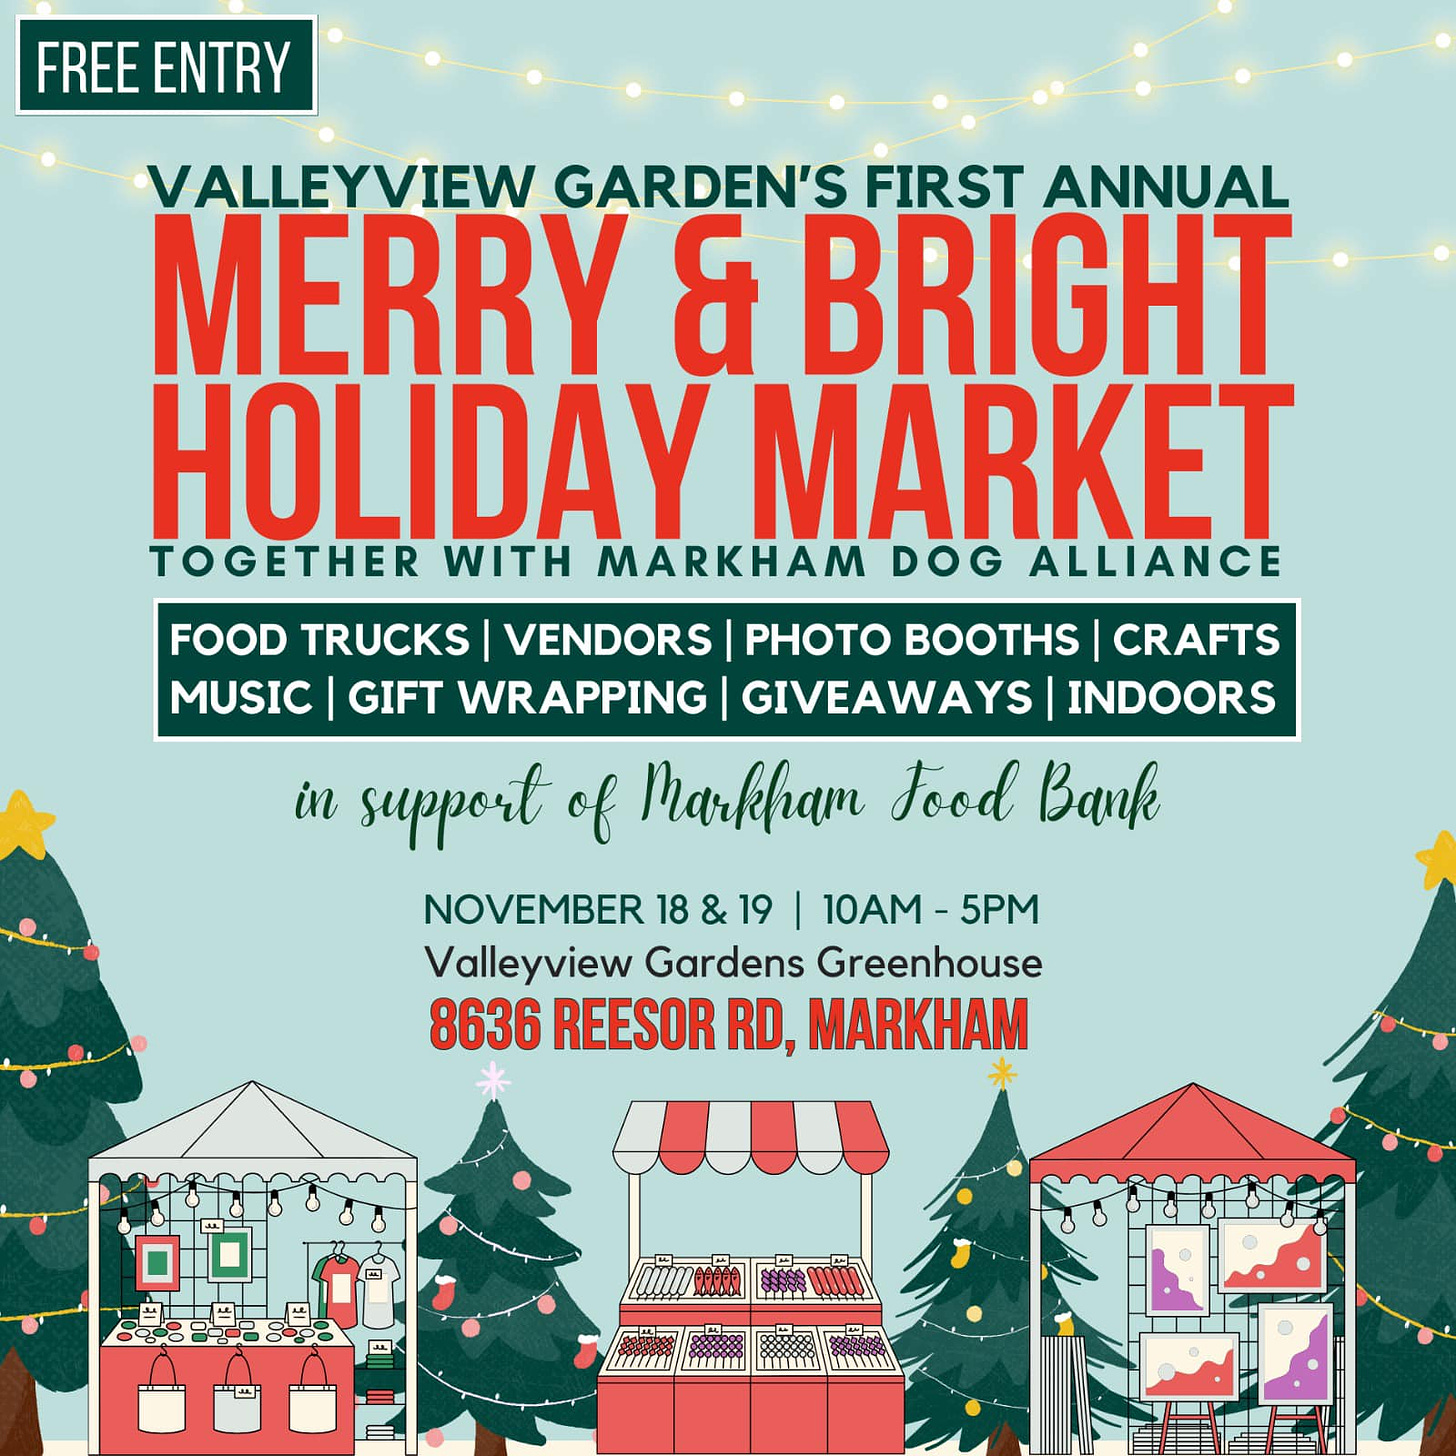 May be an image of text that says 'FREE ENTRY VALLEYVIEW GARDEN'S FIRST ANNUAL MERRY & BRIGHT HOLIDAY MARKET TOGETHER WITH MARKHAM DOG ALLIANCE FOOD TRUCKS VENDORS PHOTO BOOTHS CRAFTS MUSIC GIFT WRAPPING GIVEAWAYS INDOORS in support of Markham Food Bank NOVEMBER 18&19 10AM-5 5PM Valleyview Gardens Greenhouse 8636 REESOR RD, MARKHAM'